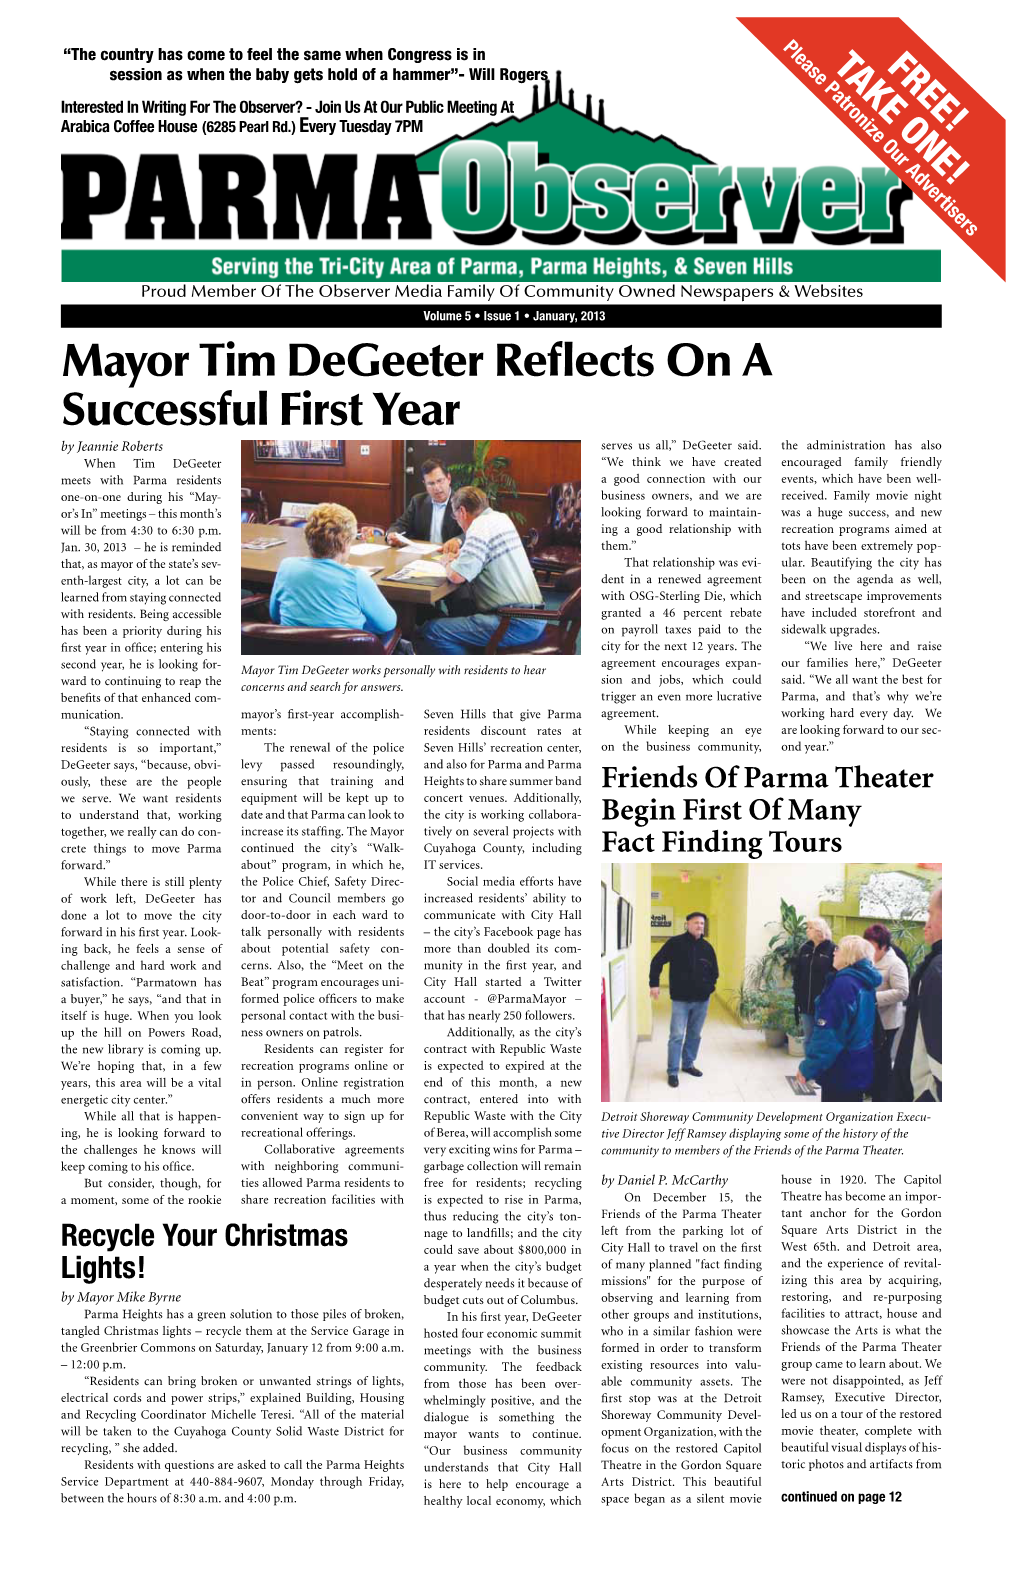 Mayor Tim Degeeter Reflects on a Successful First Year by Jeannie Roberts Serves Us All,” Degeeter Said